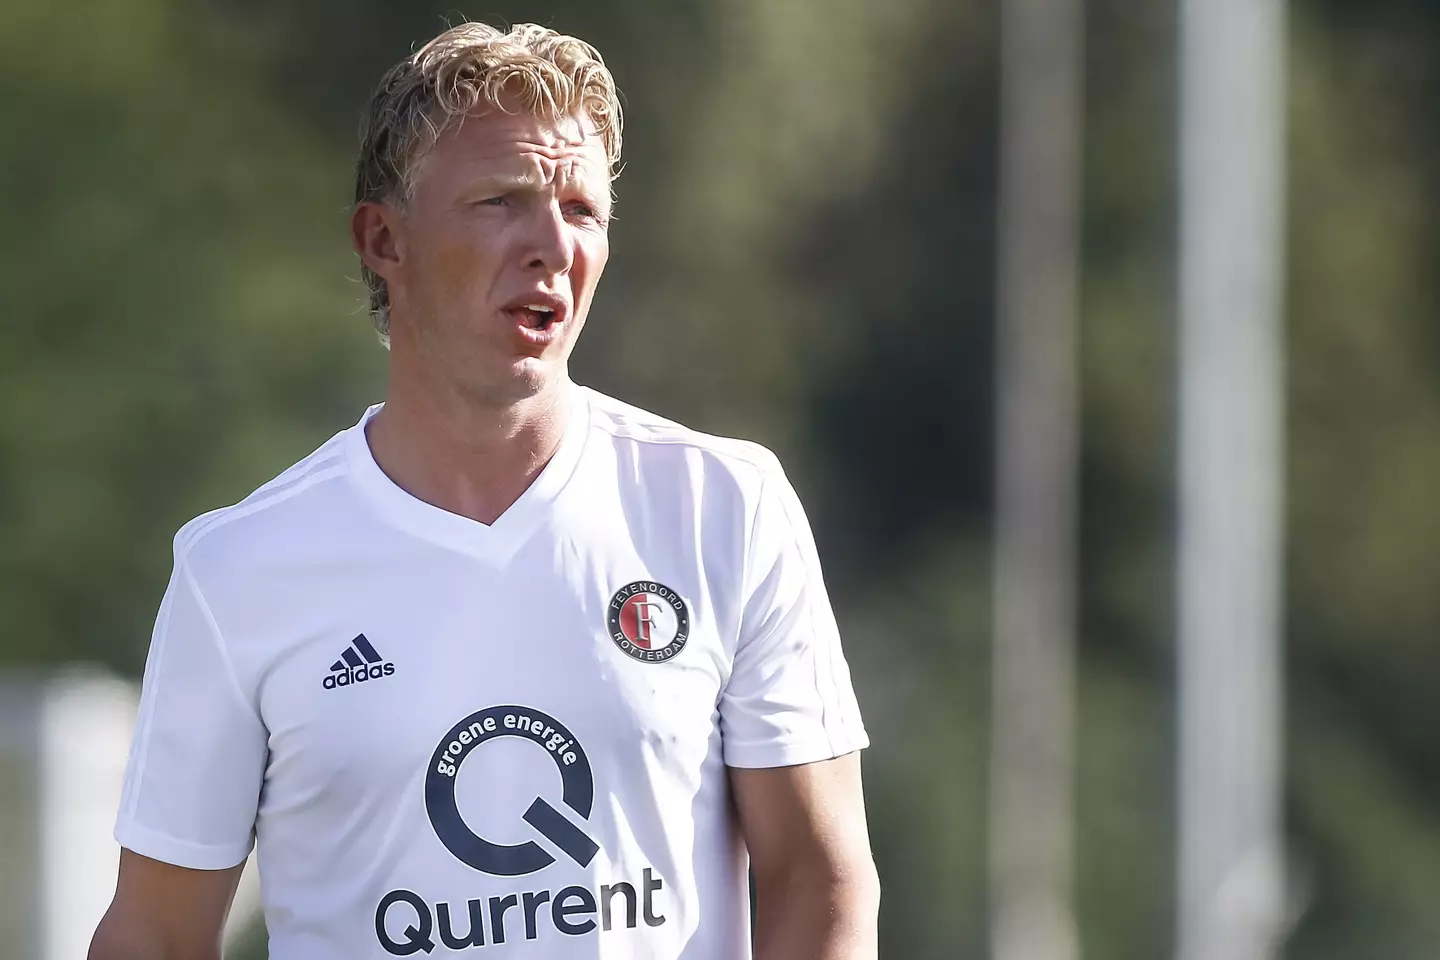 Kuyt is set to make his ring debut in October (Image: PA)